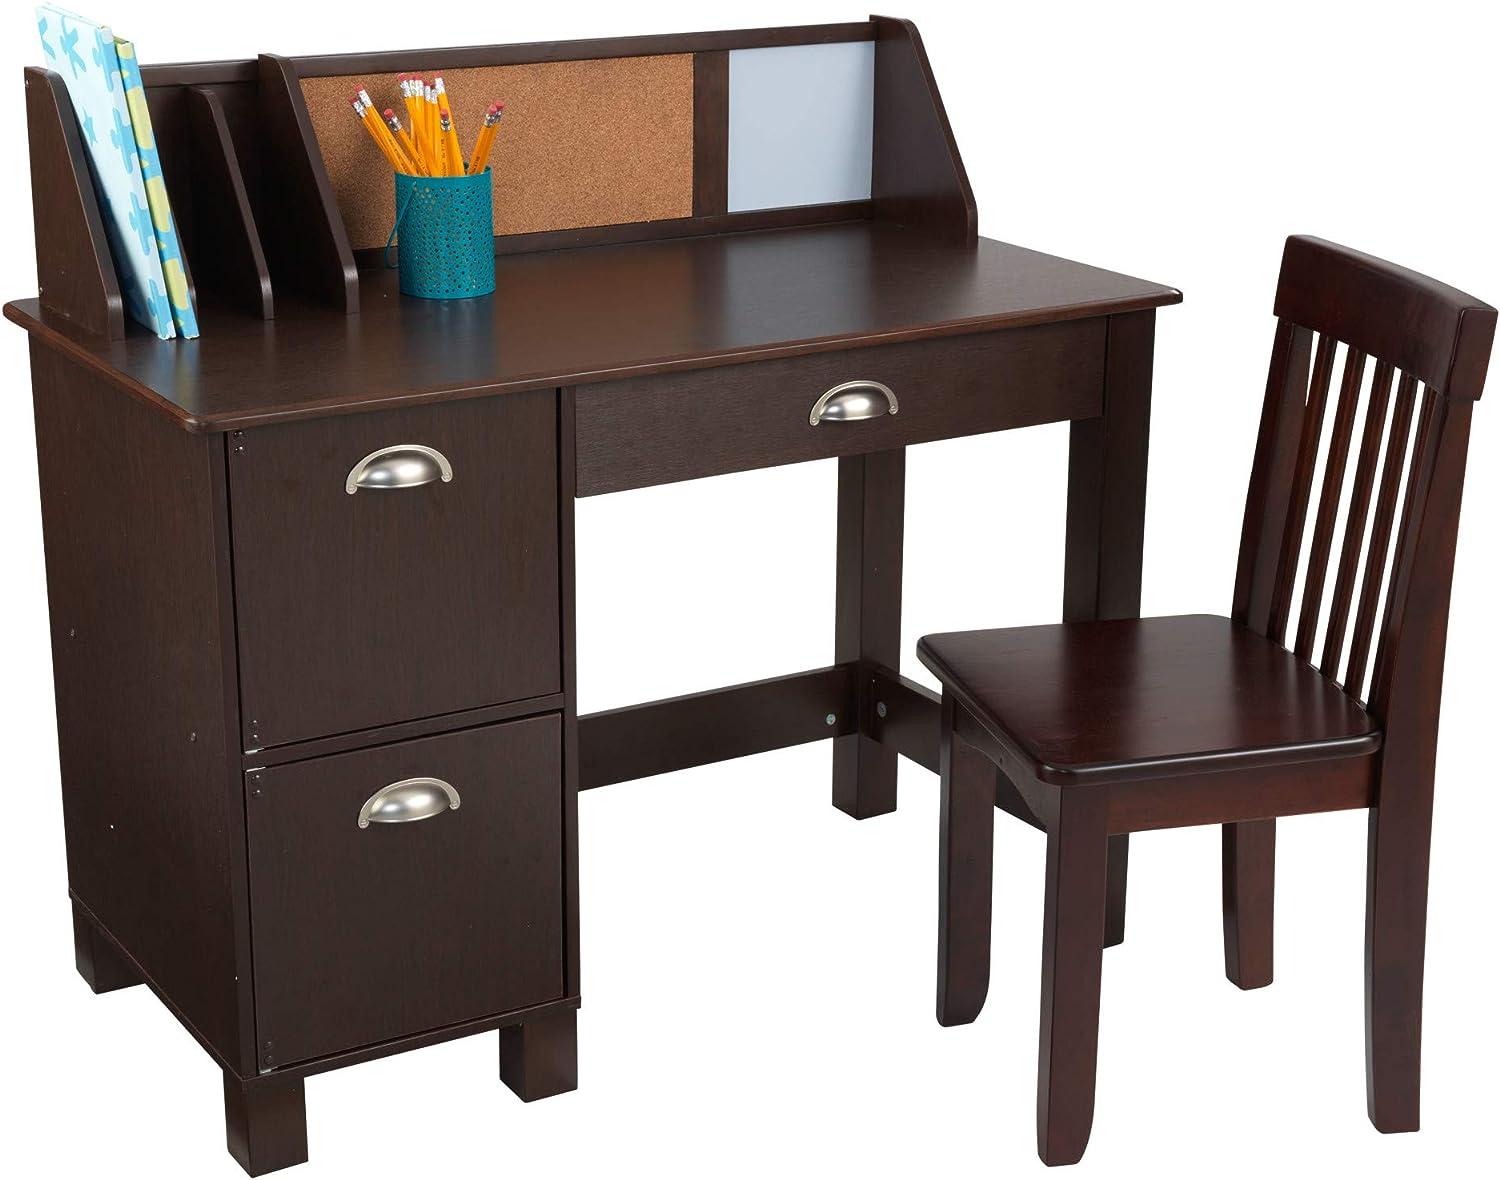 KidKraft Wooden Study Desk with Chair for $94 Shipped